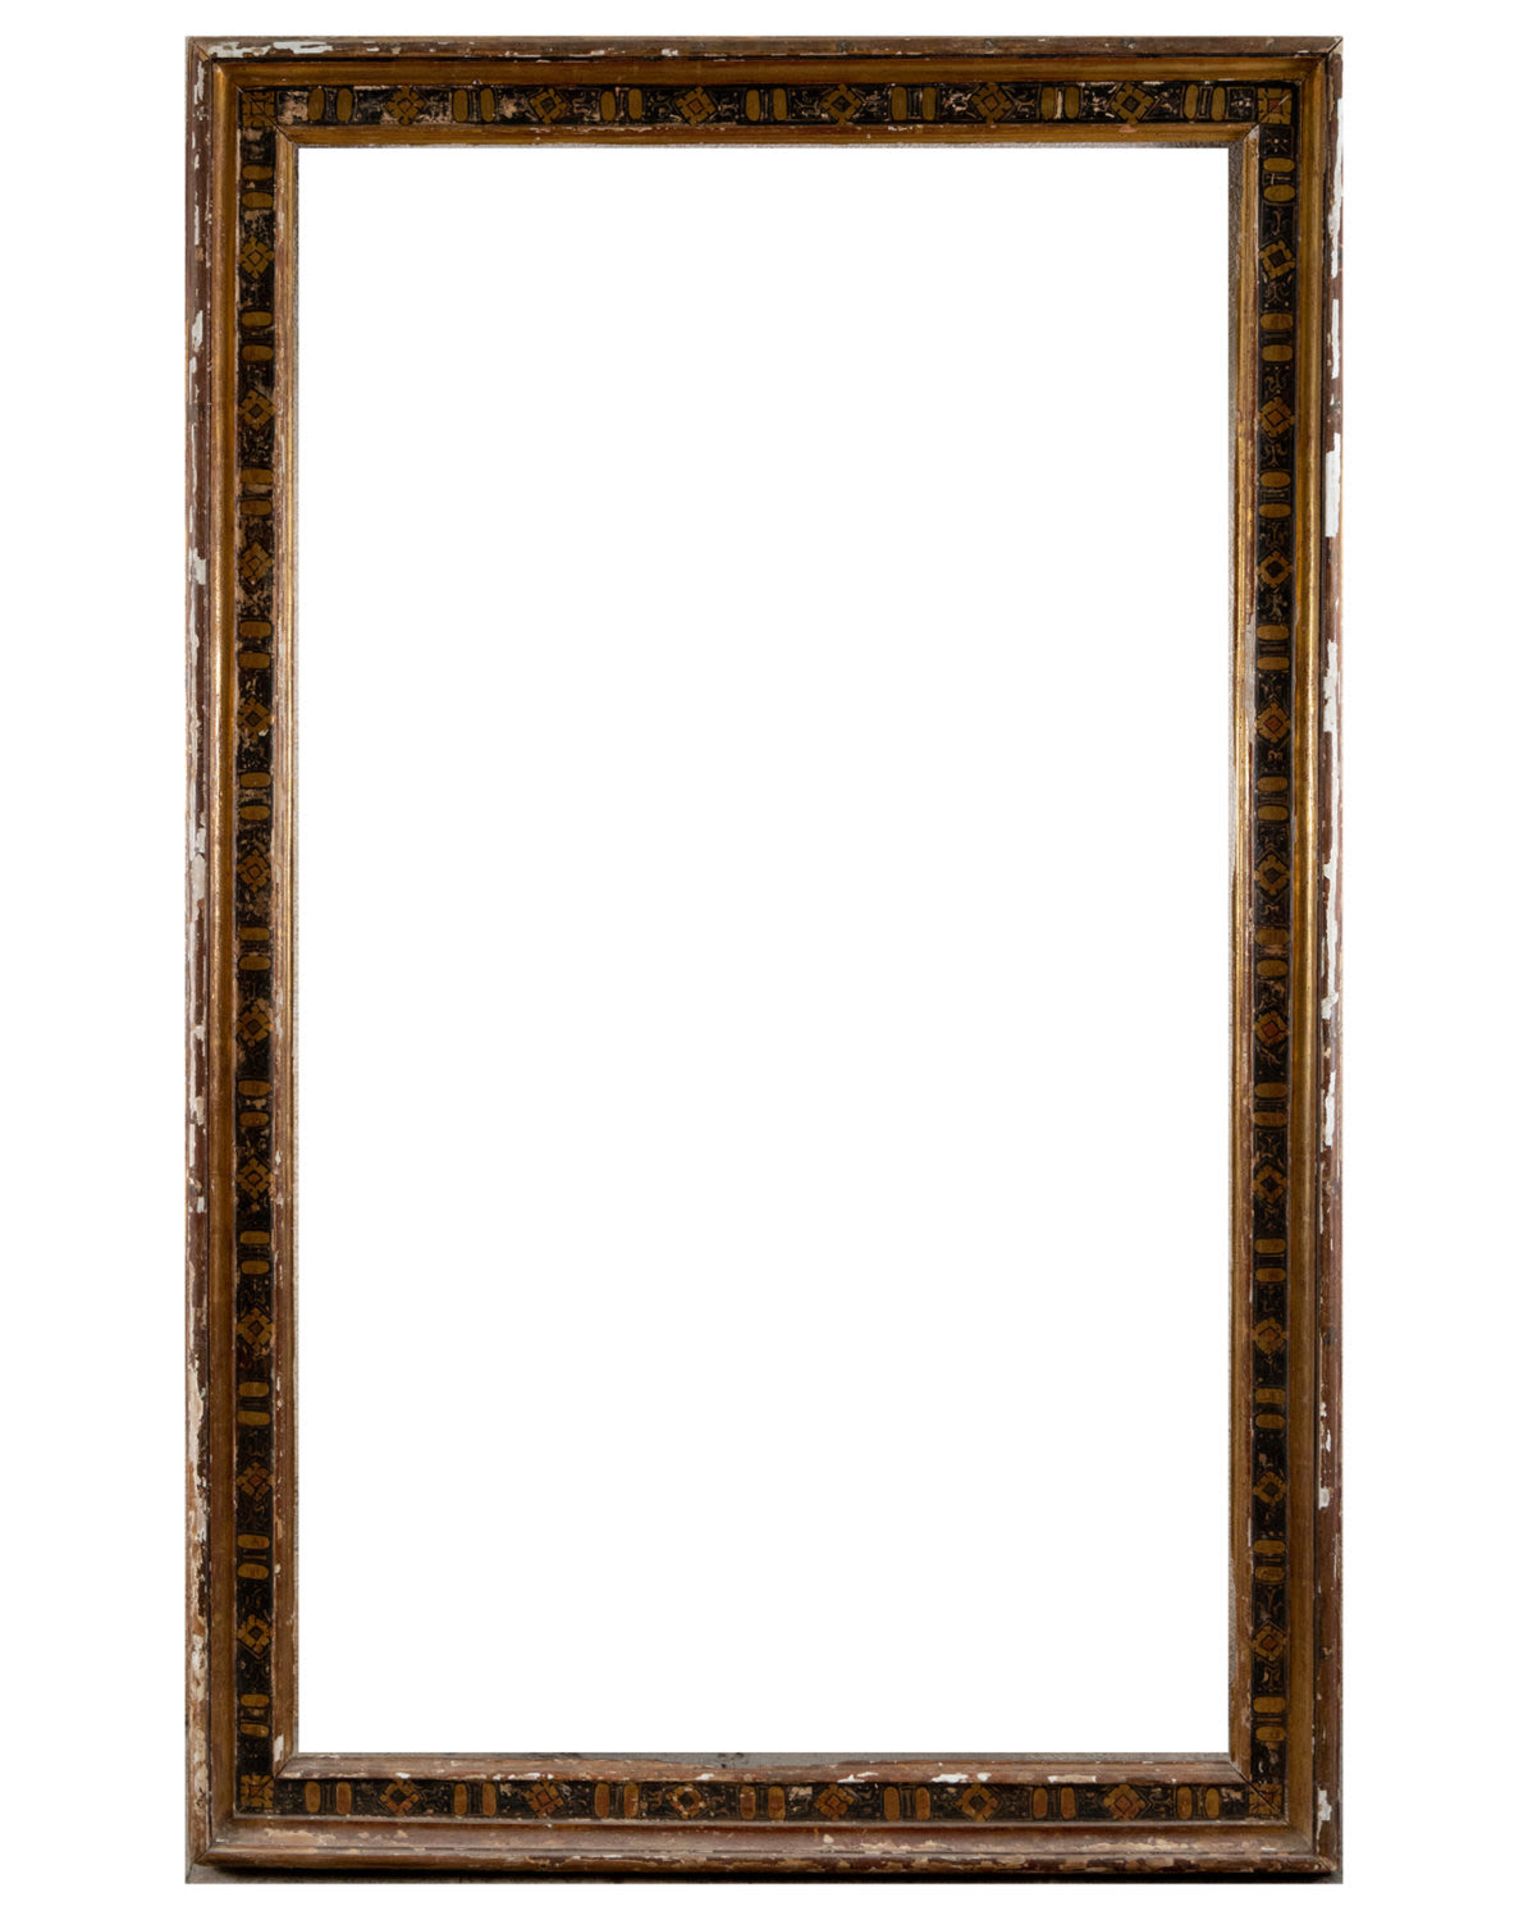 Large colonial frame in polychrome and gilded wood, 18th century